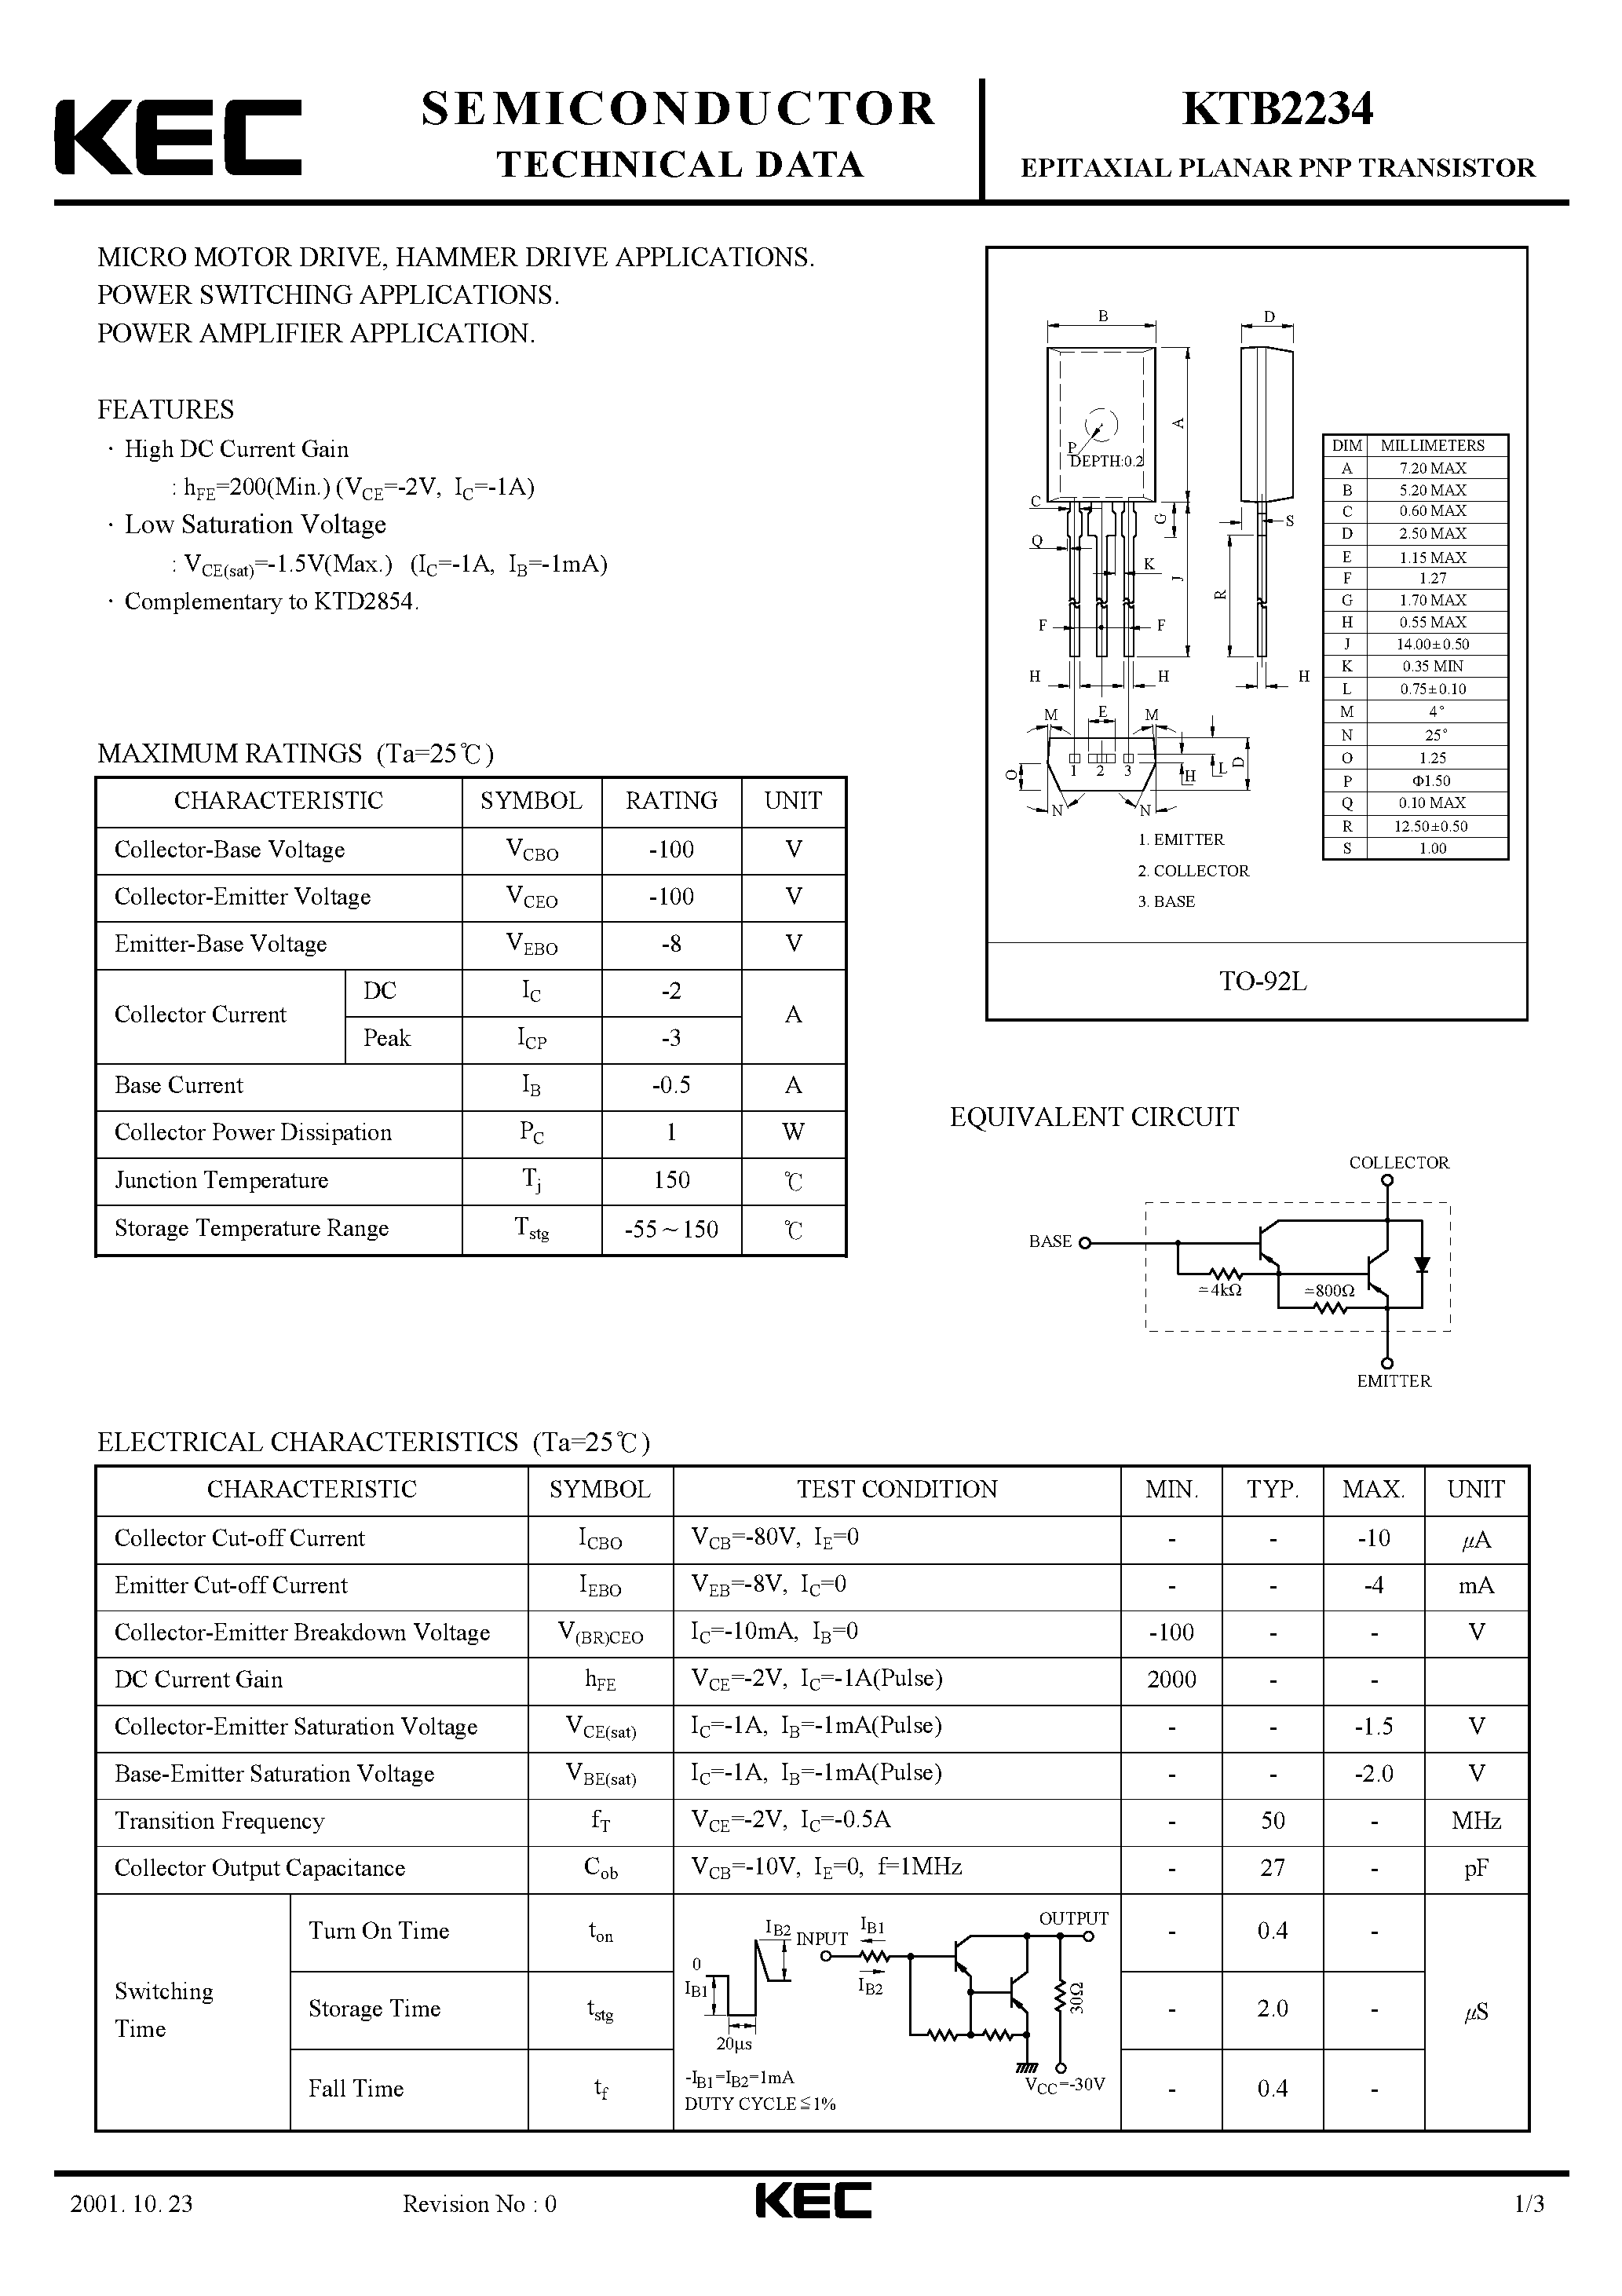 Datasheet KTB2234 - EPITAXIAL PLANAR PNP TRANSISTOR (MICRO MOTOR DRIVE/ HAMMER DRIVE/ POWER SWITCHING/ POWER AMPLIFIER) page 1